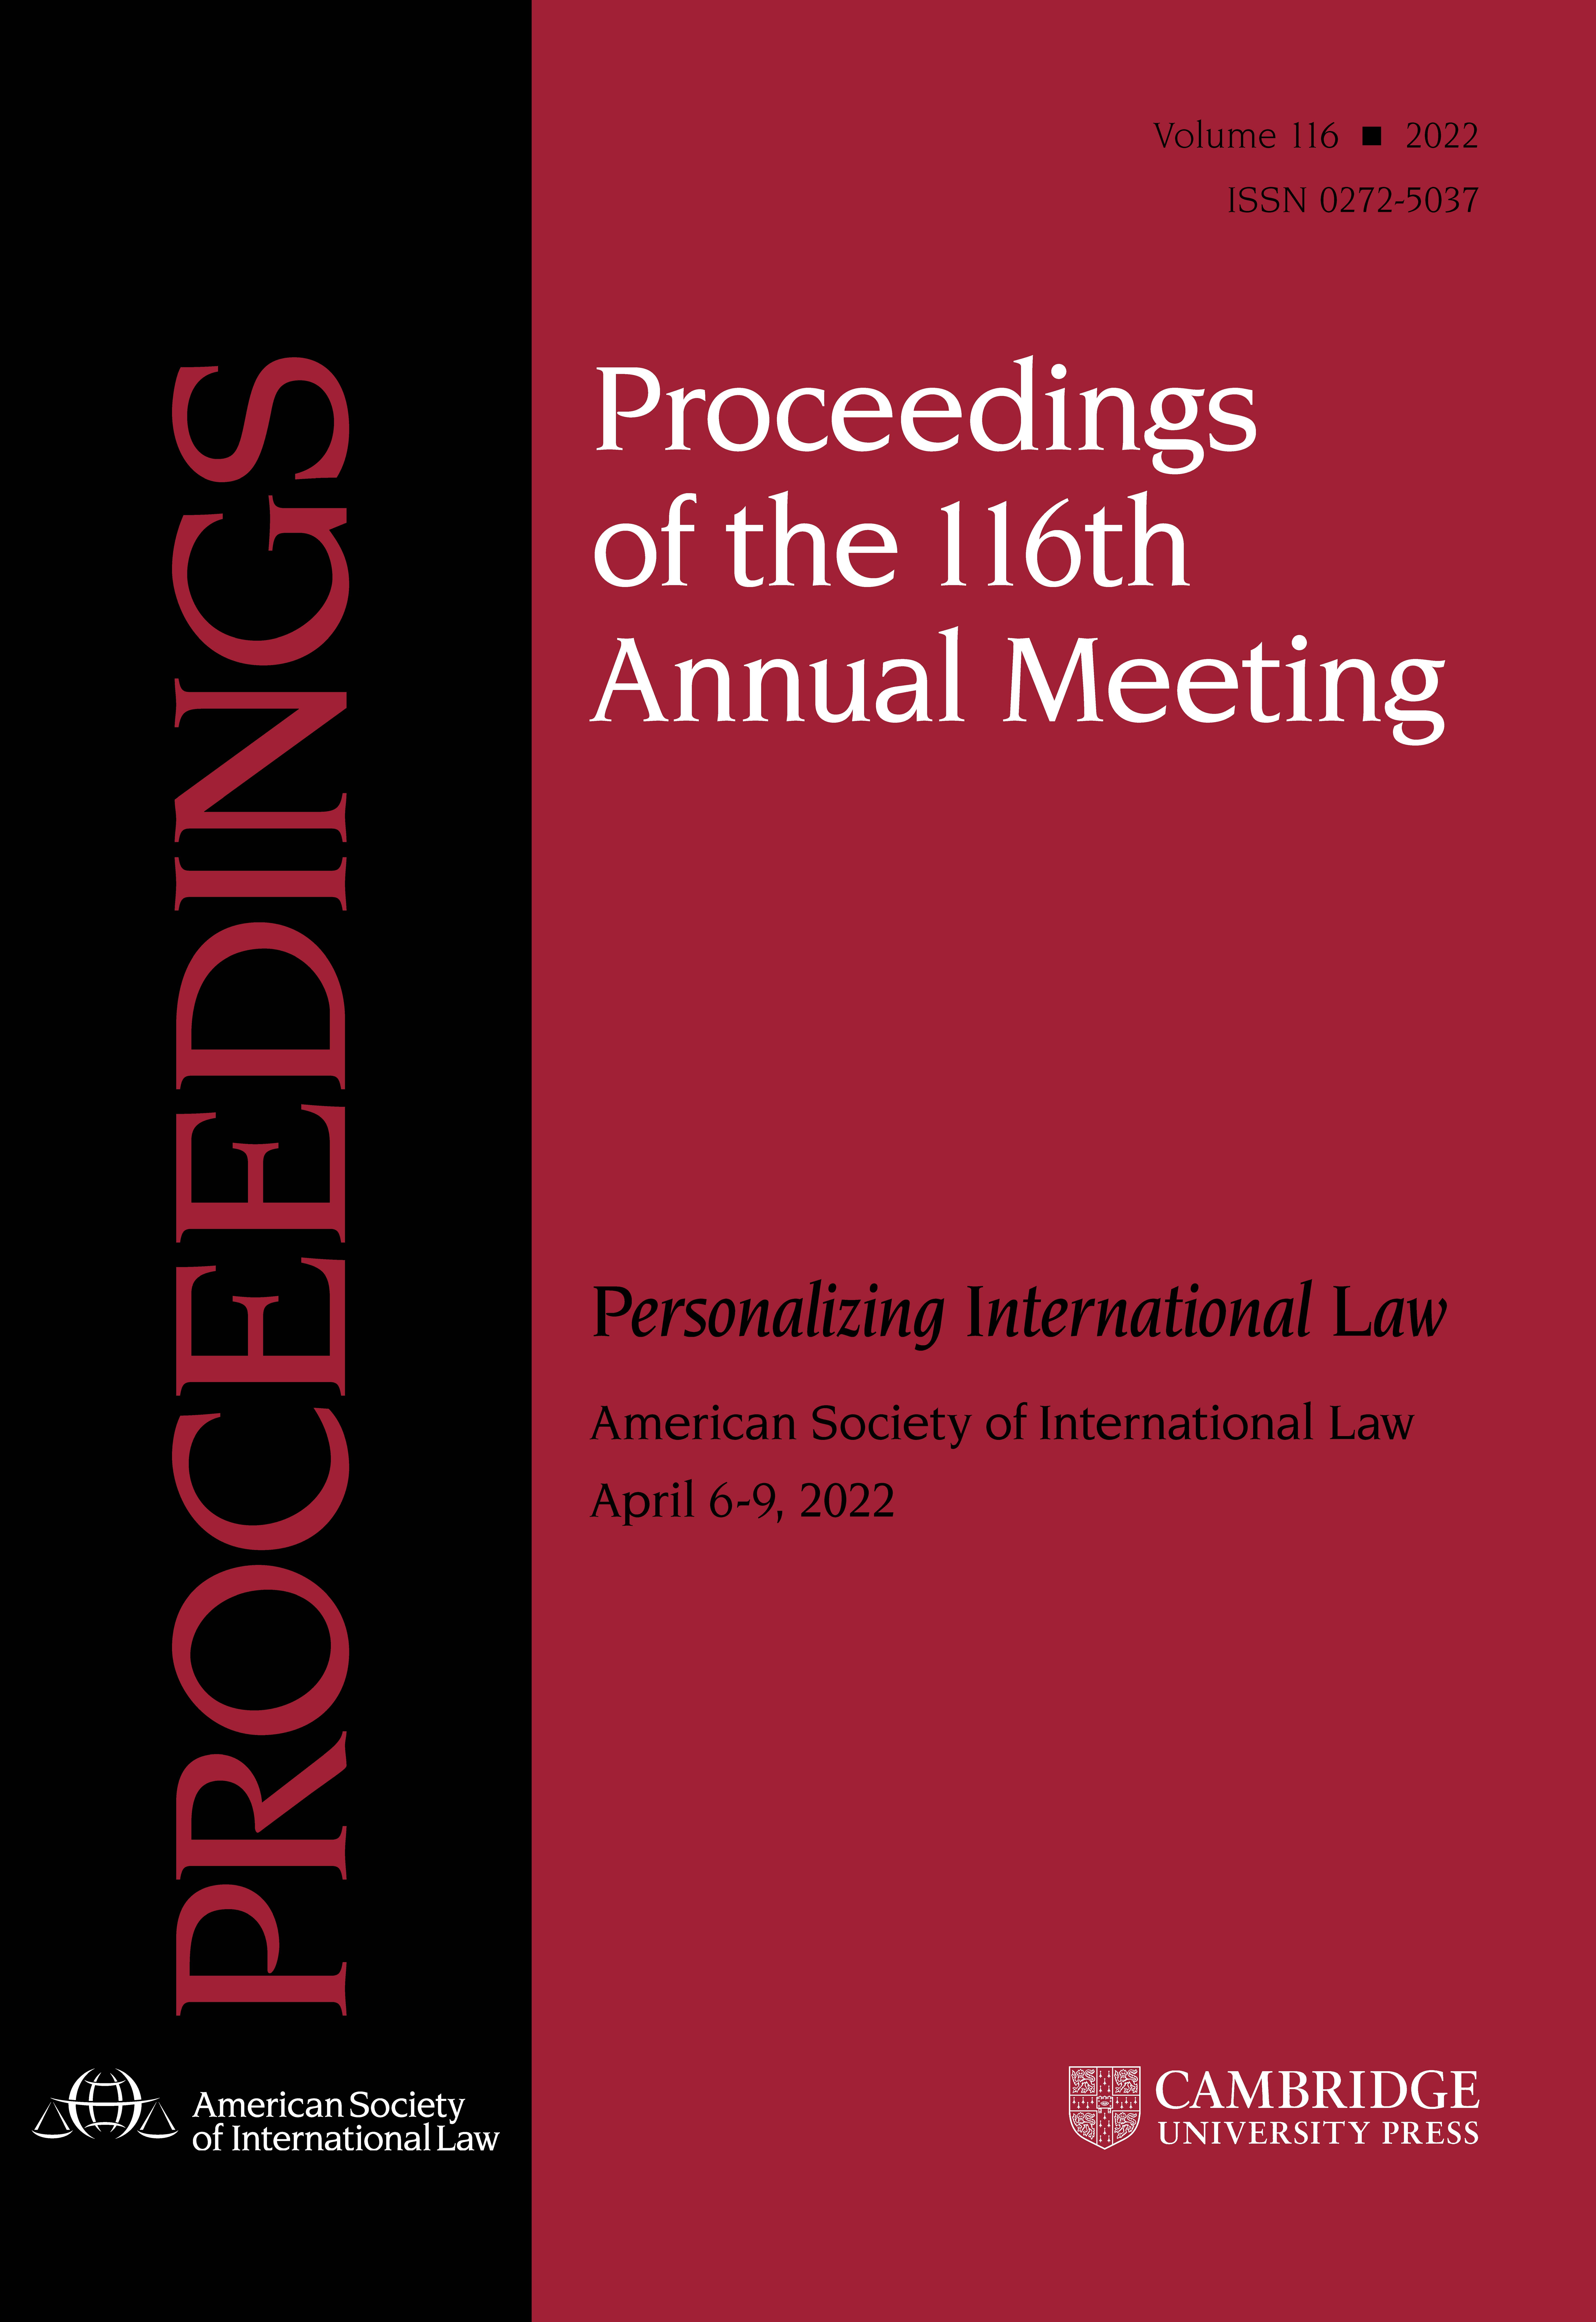 Proceedings of the ASIL Annual Meeting